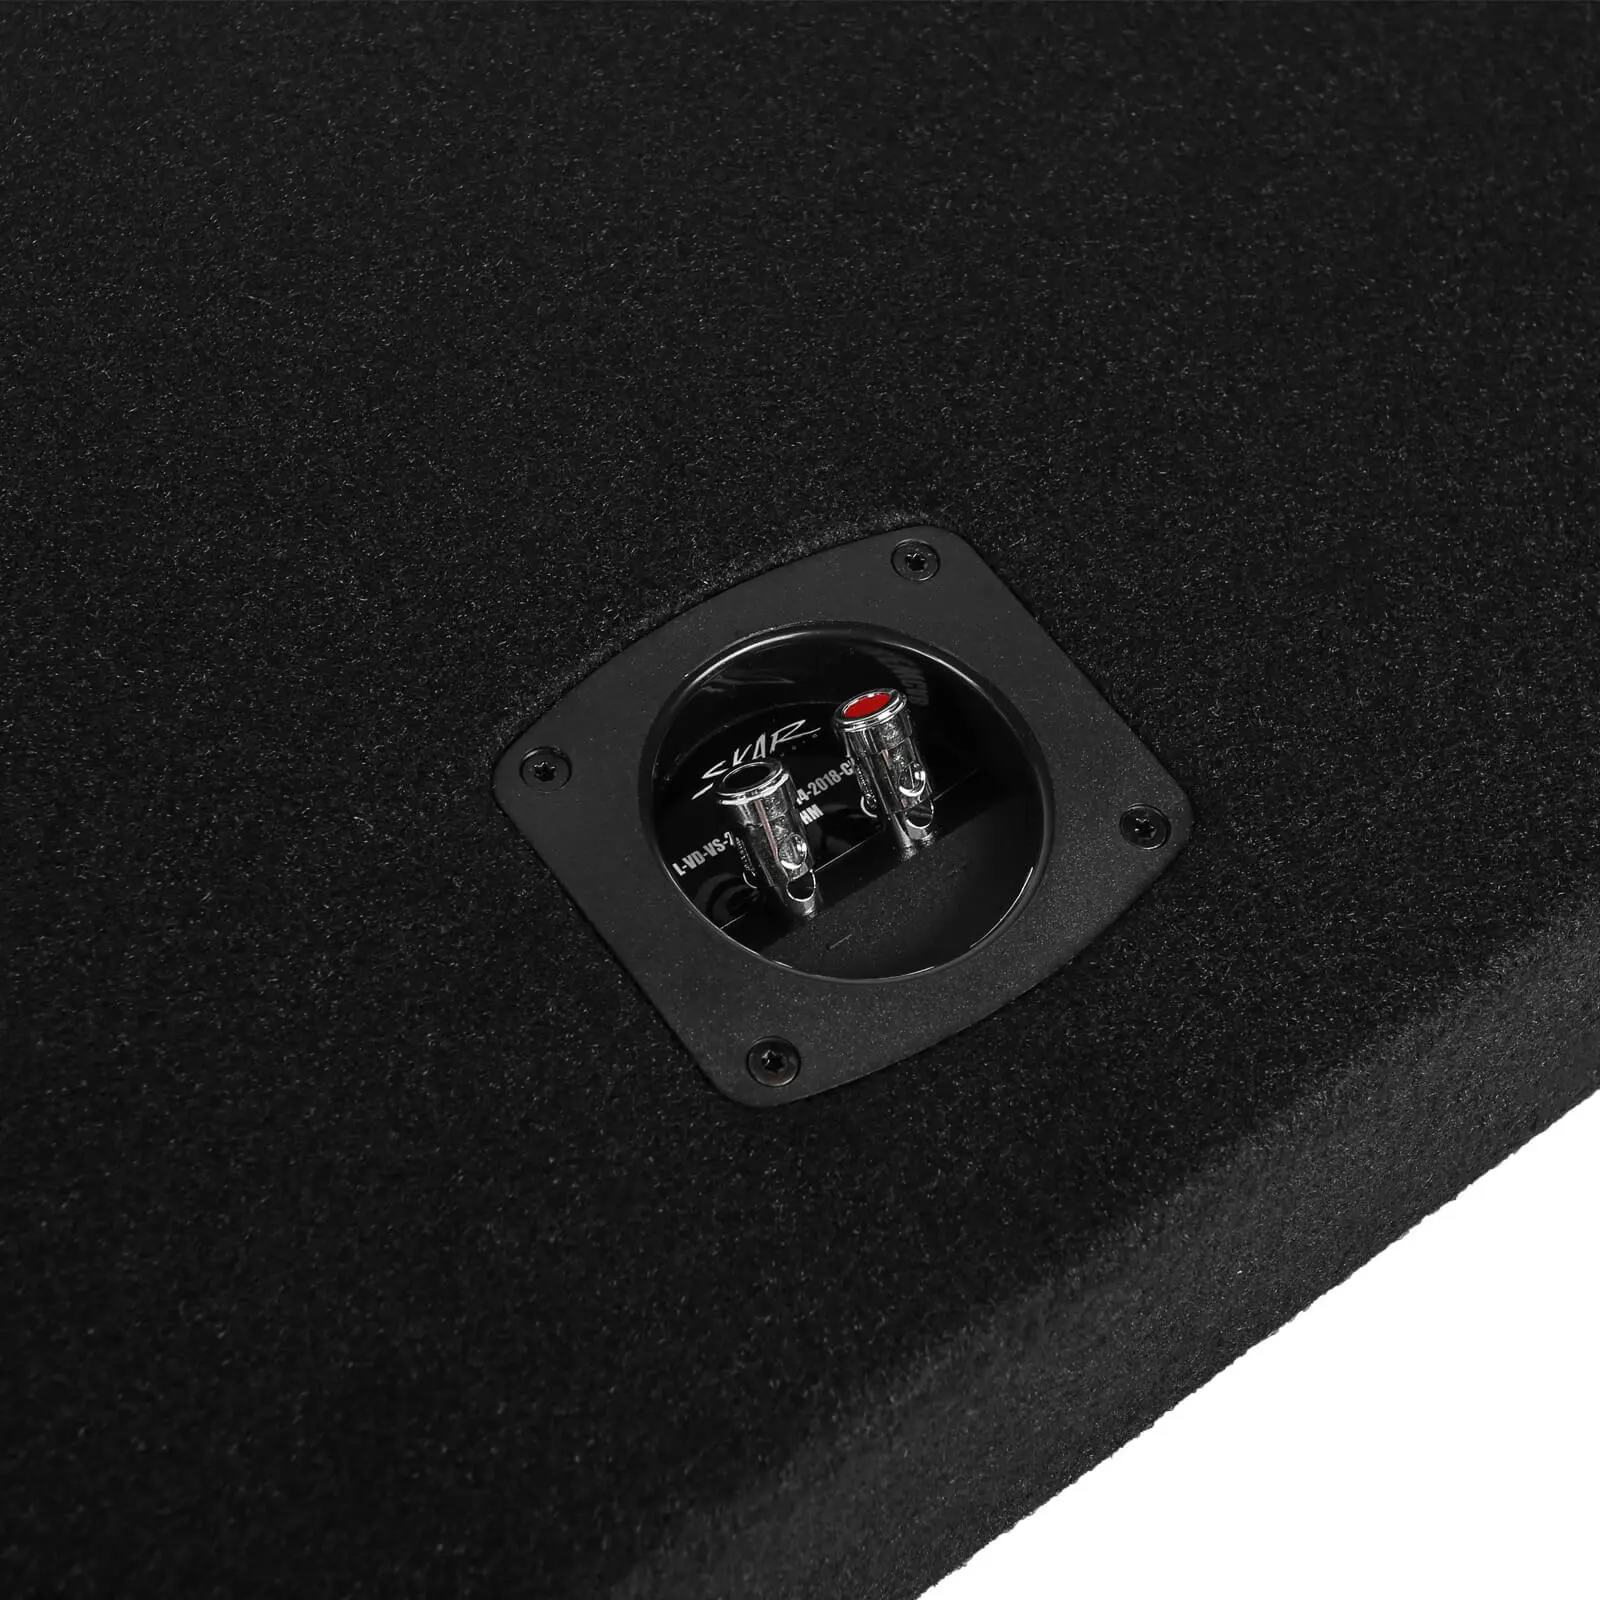 Dual 10" 1,600W Max Power Loaded Subwoofer Enclosure Compatible with 2014-2018 Chevy Silverado & GMC Sierra Crew Cab Trucks #6